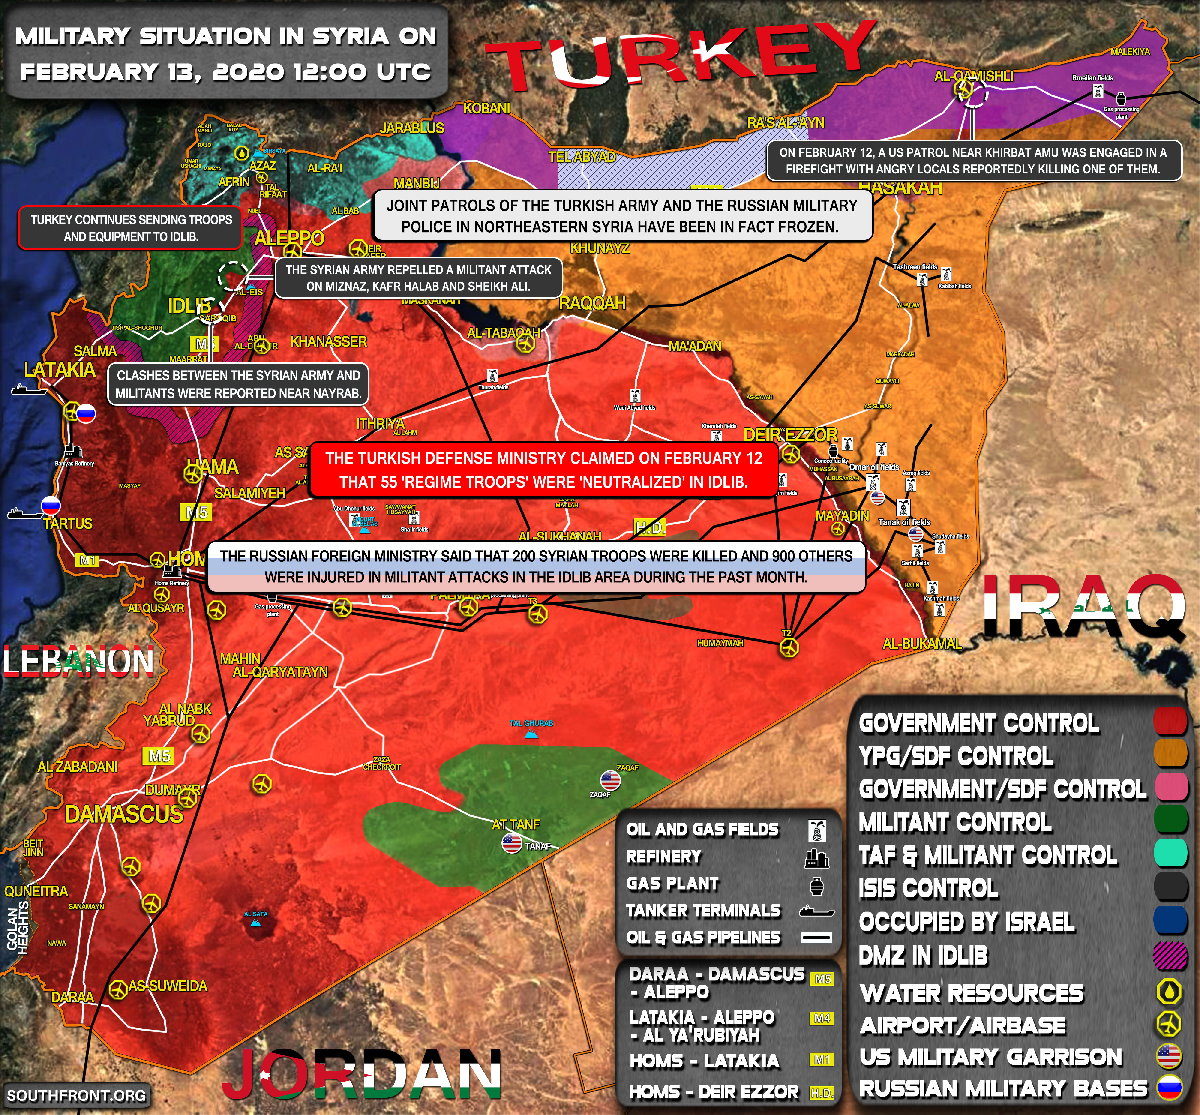 Military situation in Syria on Feb 13 2020